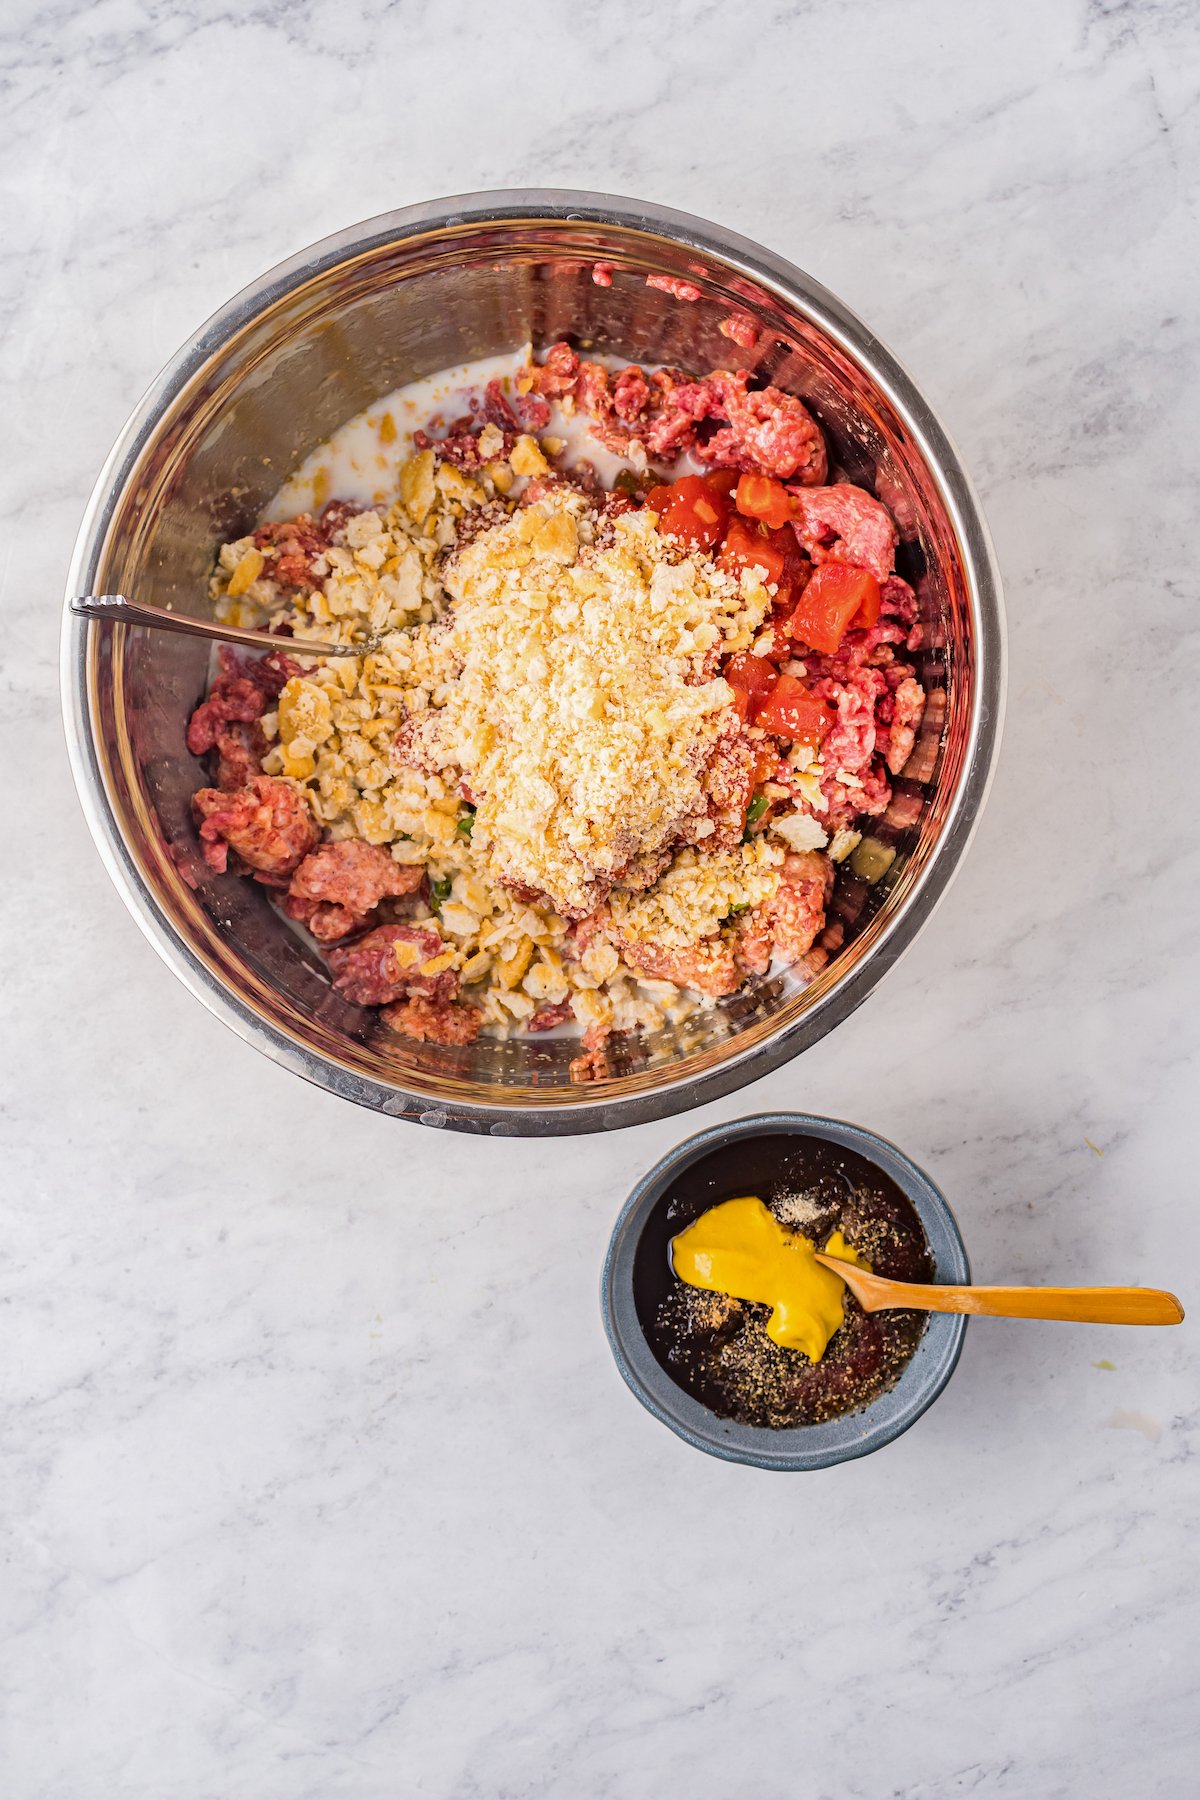 Raw hamburger, cracker crumbs. diced tomatoes, and other ingredients in a mixing bowl. A smaller bowl of topping ingredients is nearby on the work surface.